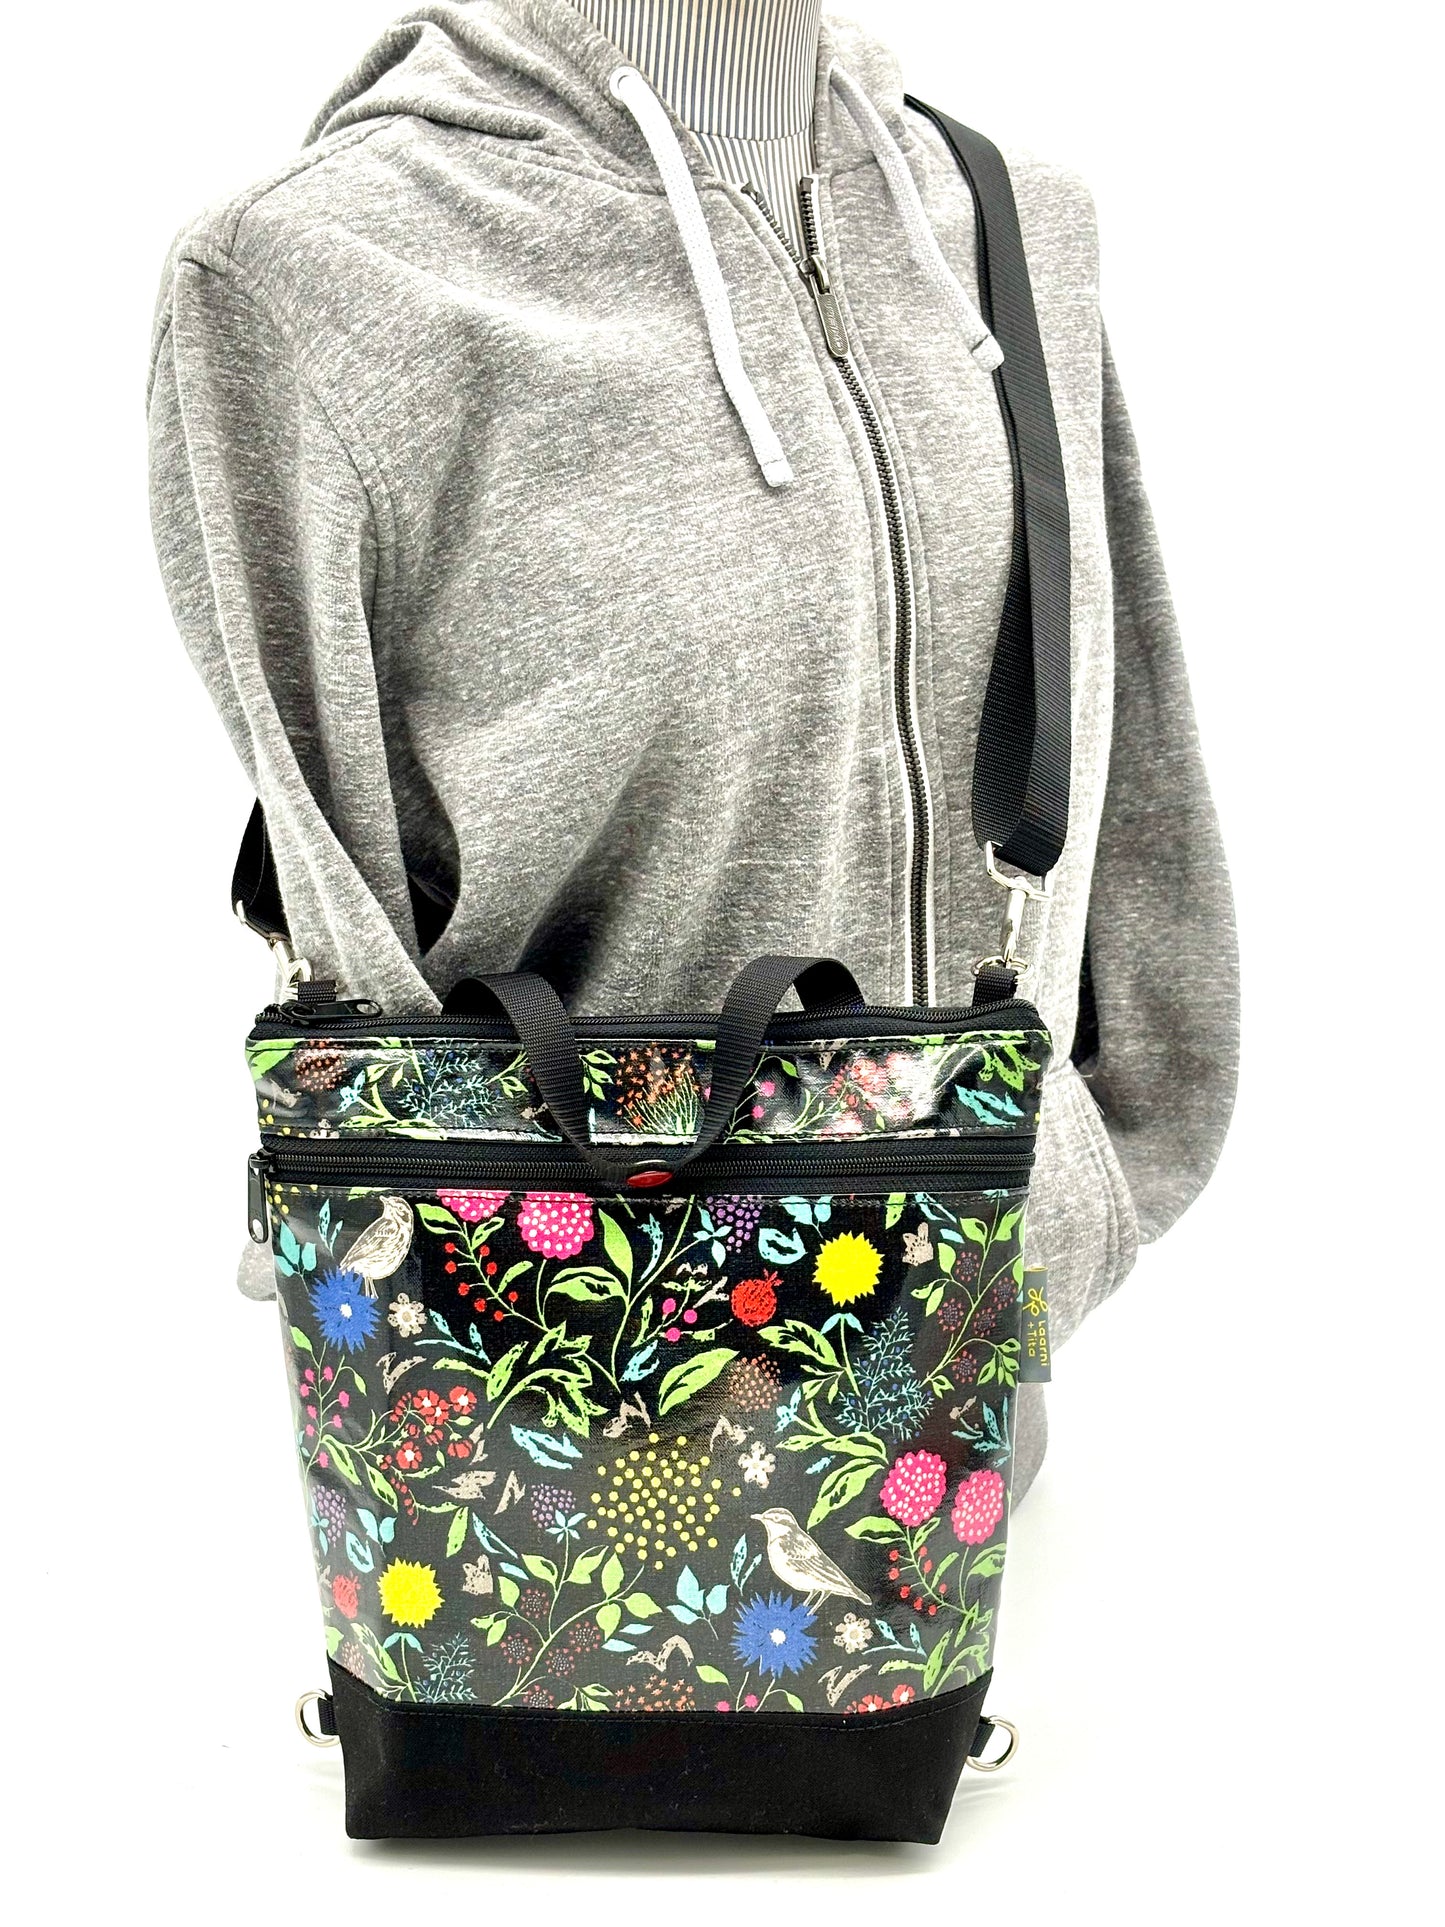 Backpack/Crossbody in Wildflowers pink and blue